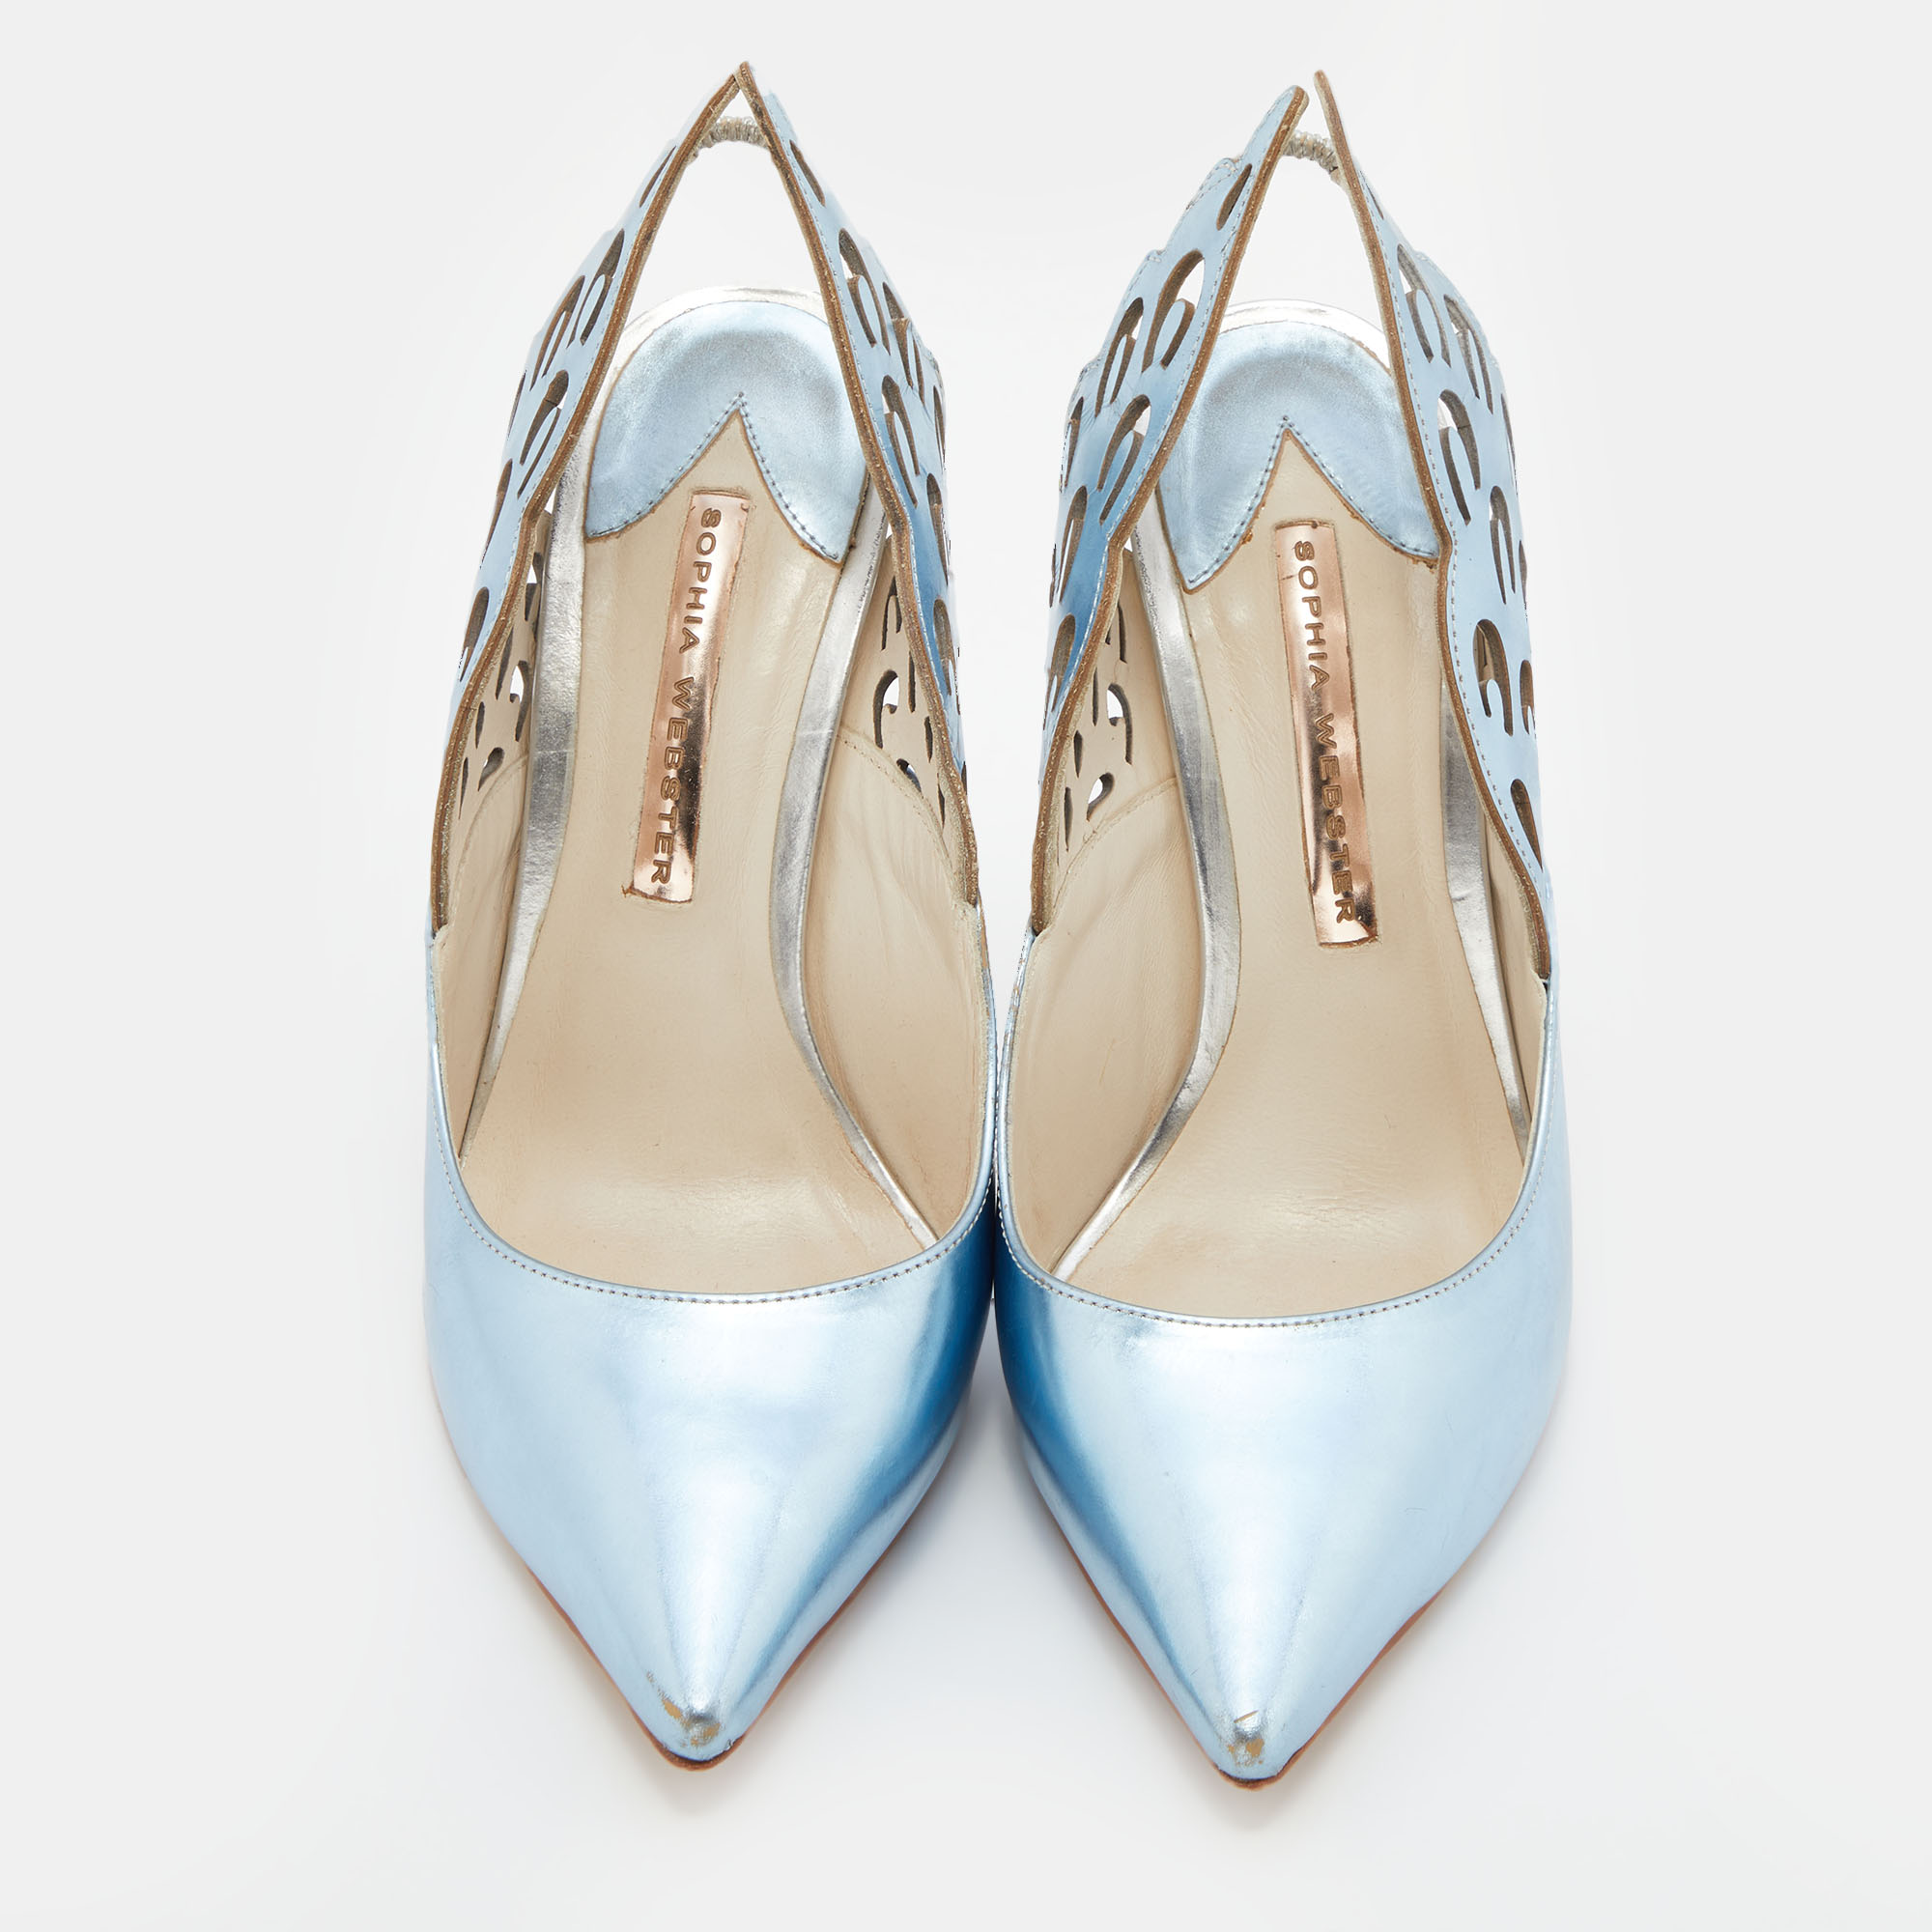 Sophia Webster Metallic Blue/Silver Leather Angelo Pointed Toe Slingback Pumps Size 37